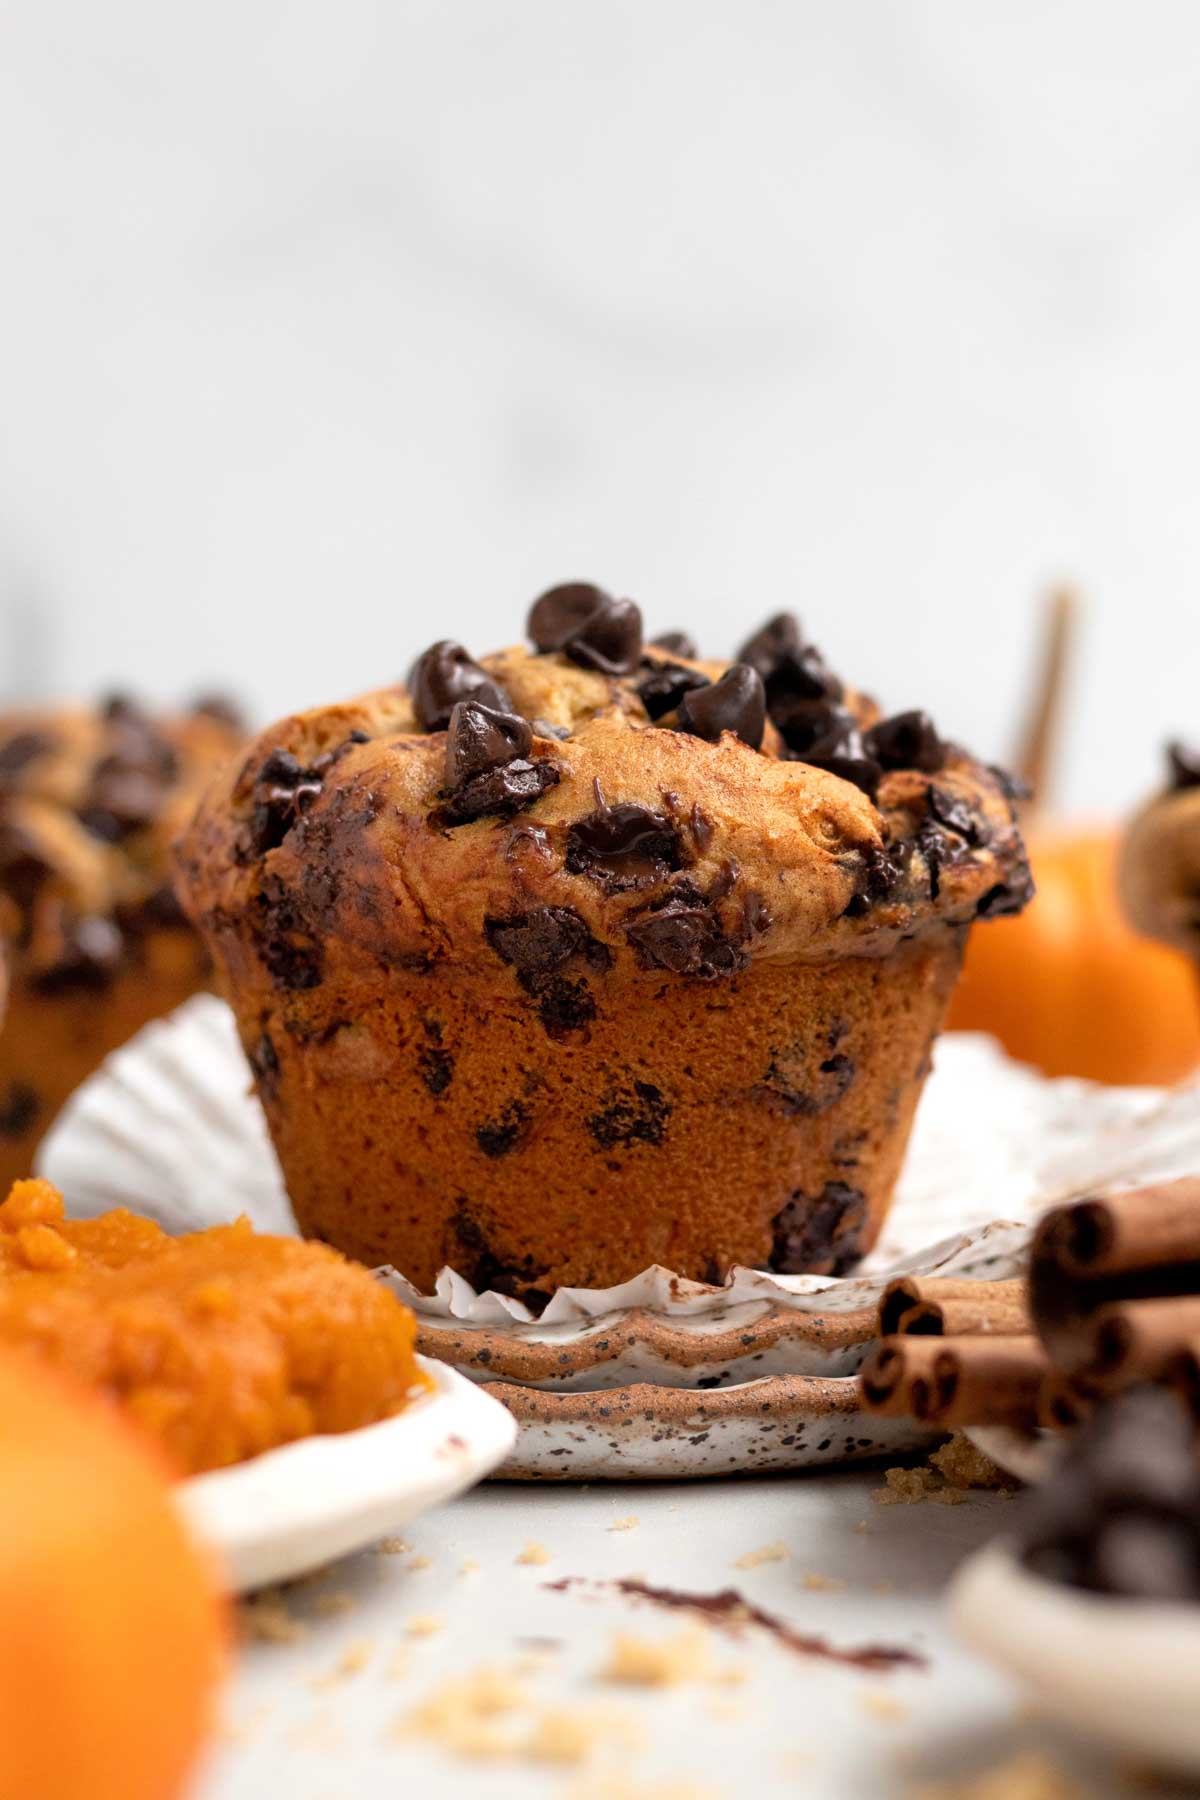 A delicious golden brown Gluten Free Pumpkin Muffin adorned and embedded with melty chocolate chips.